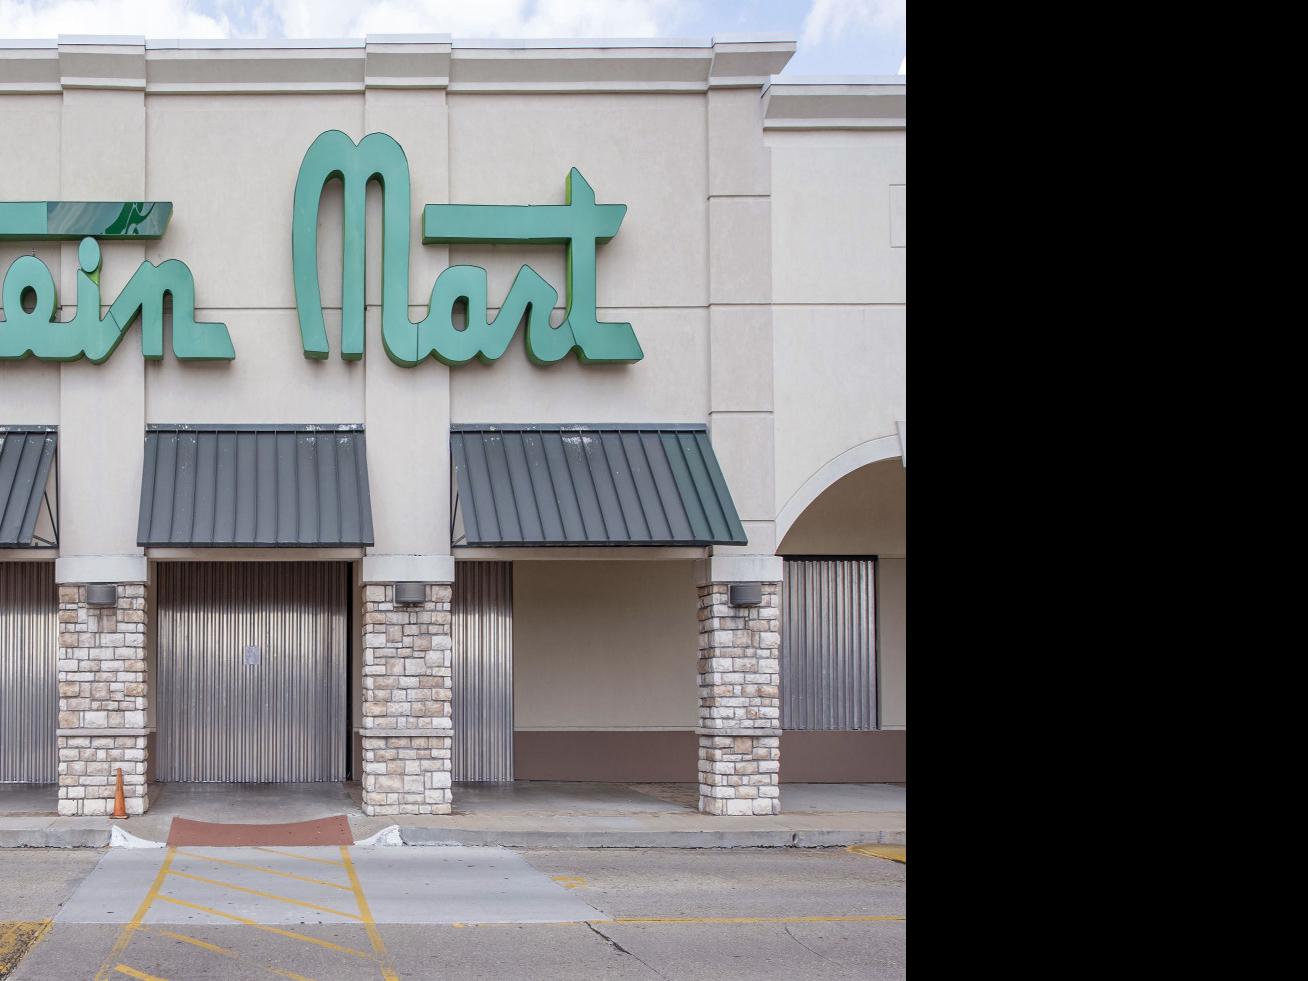 Stein Mart files Chapter 11, may close all stores